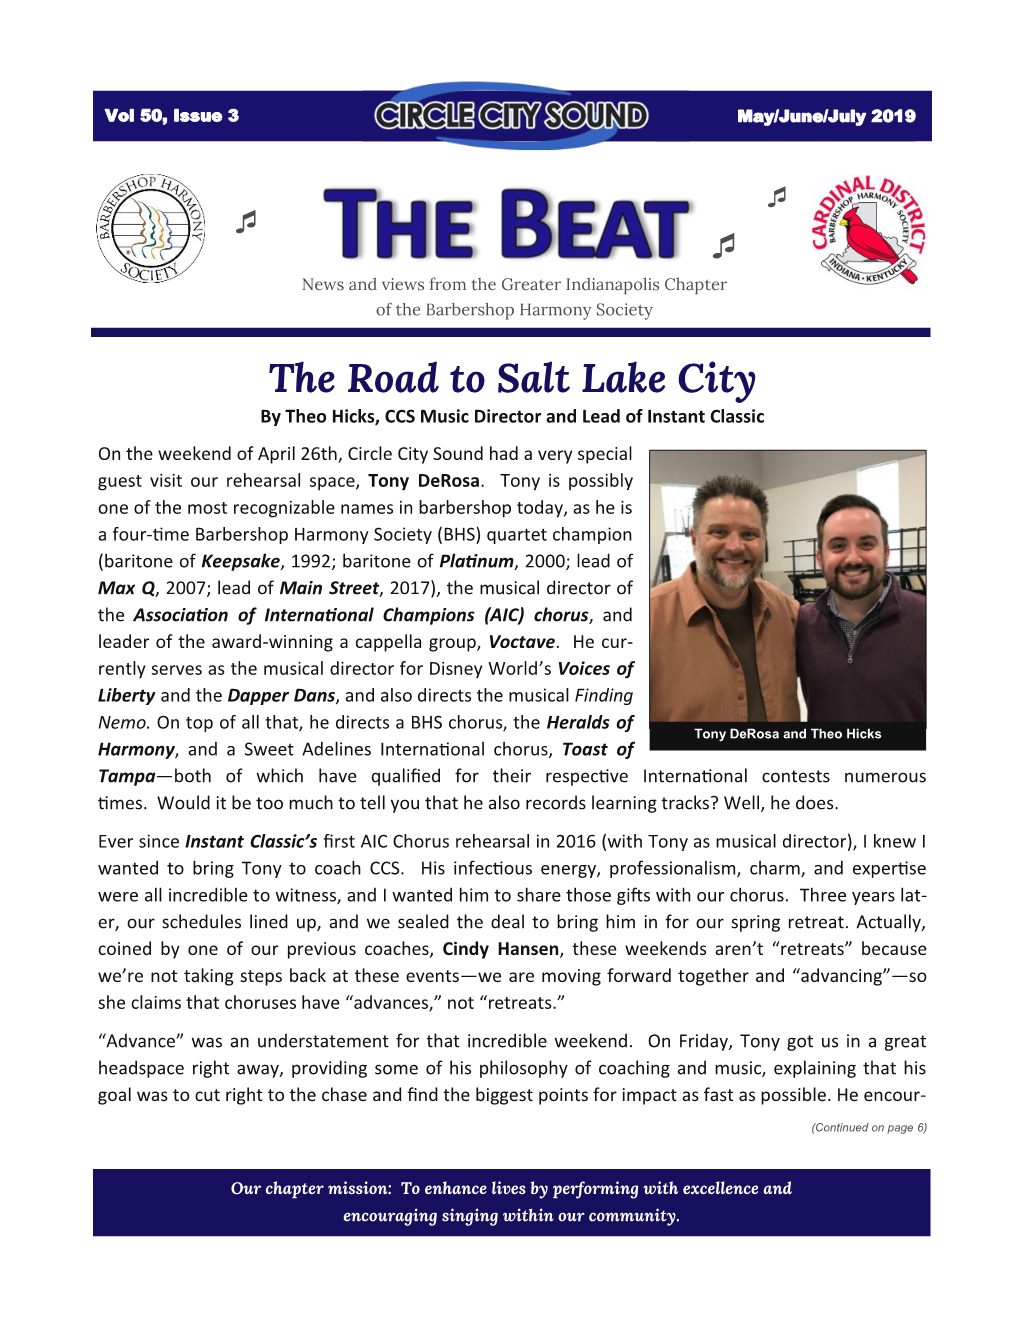 National Barbershop Quartet Day 2019 by Jerry Troxel, Editor of the Beat